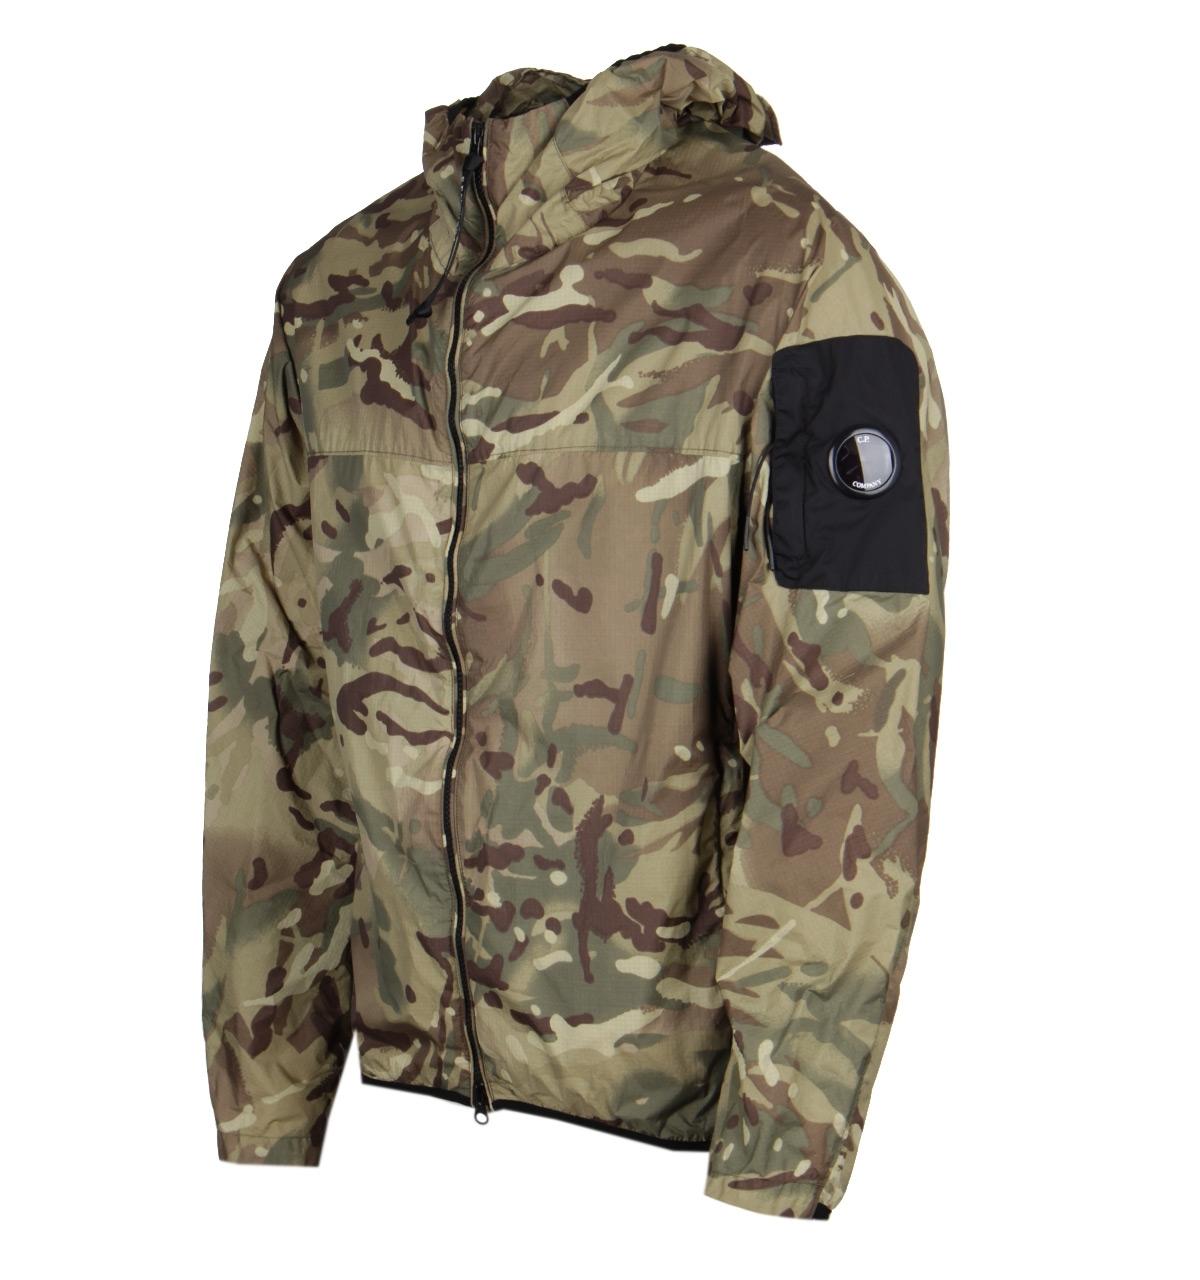 buy > camo cp company, Up to 75% OFF